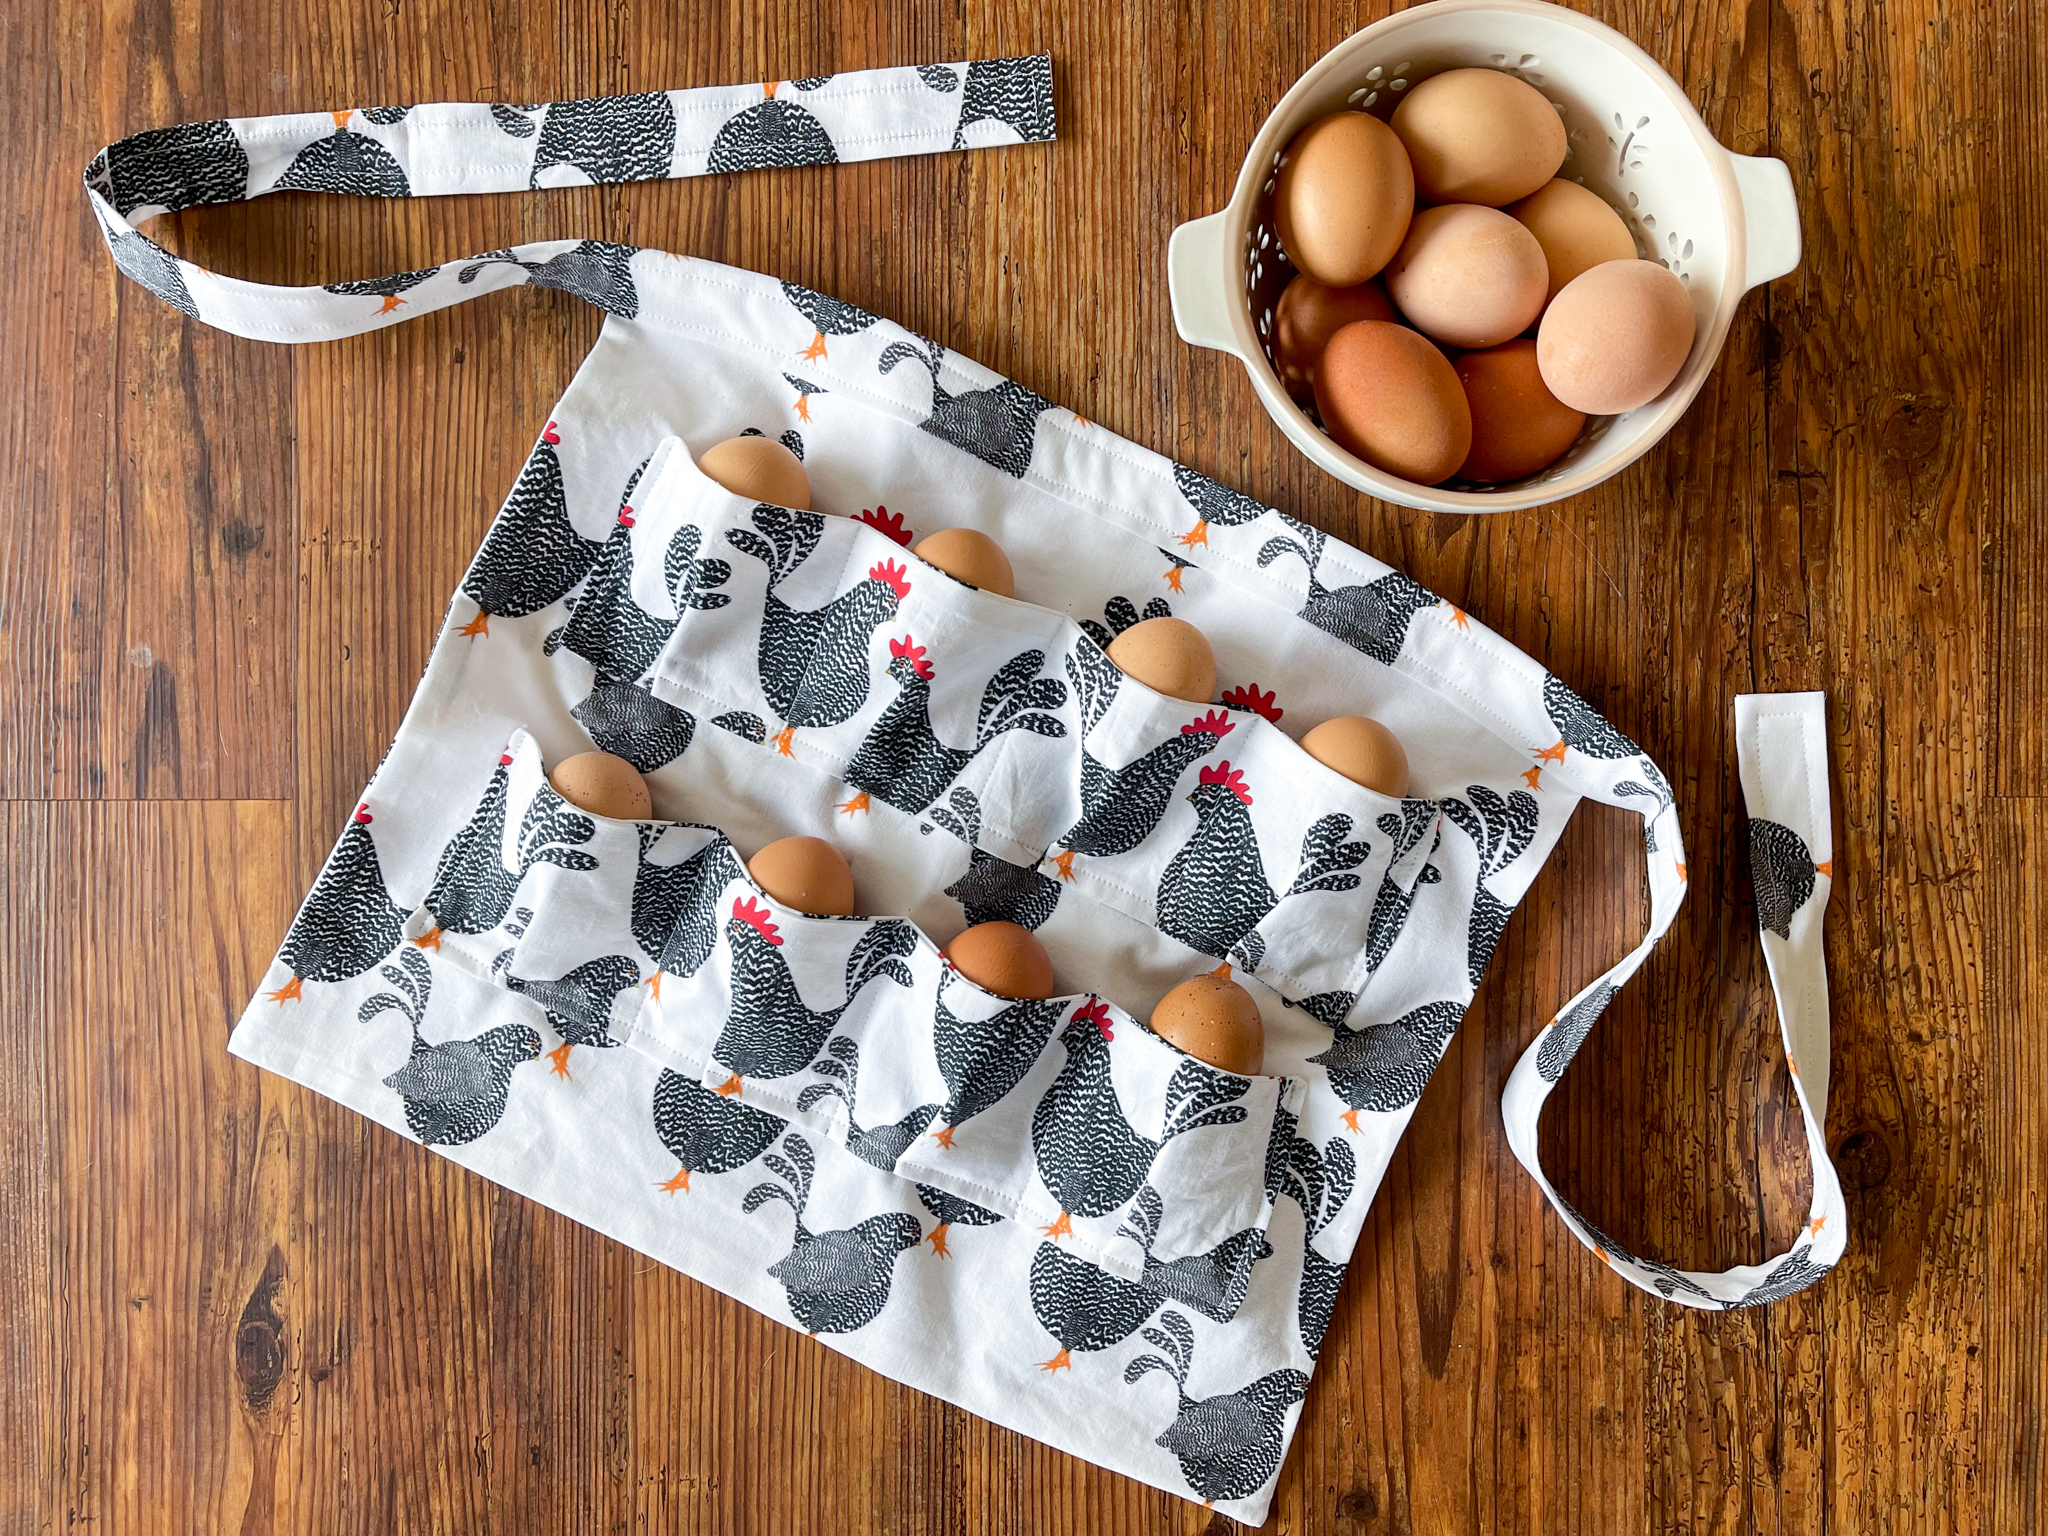 How to Make an Egg Apron